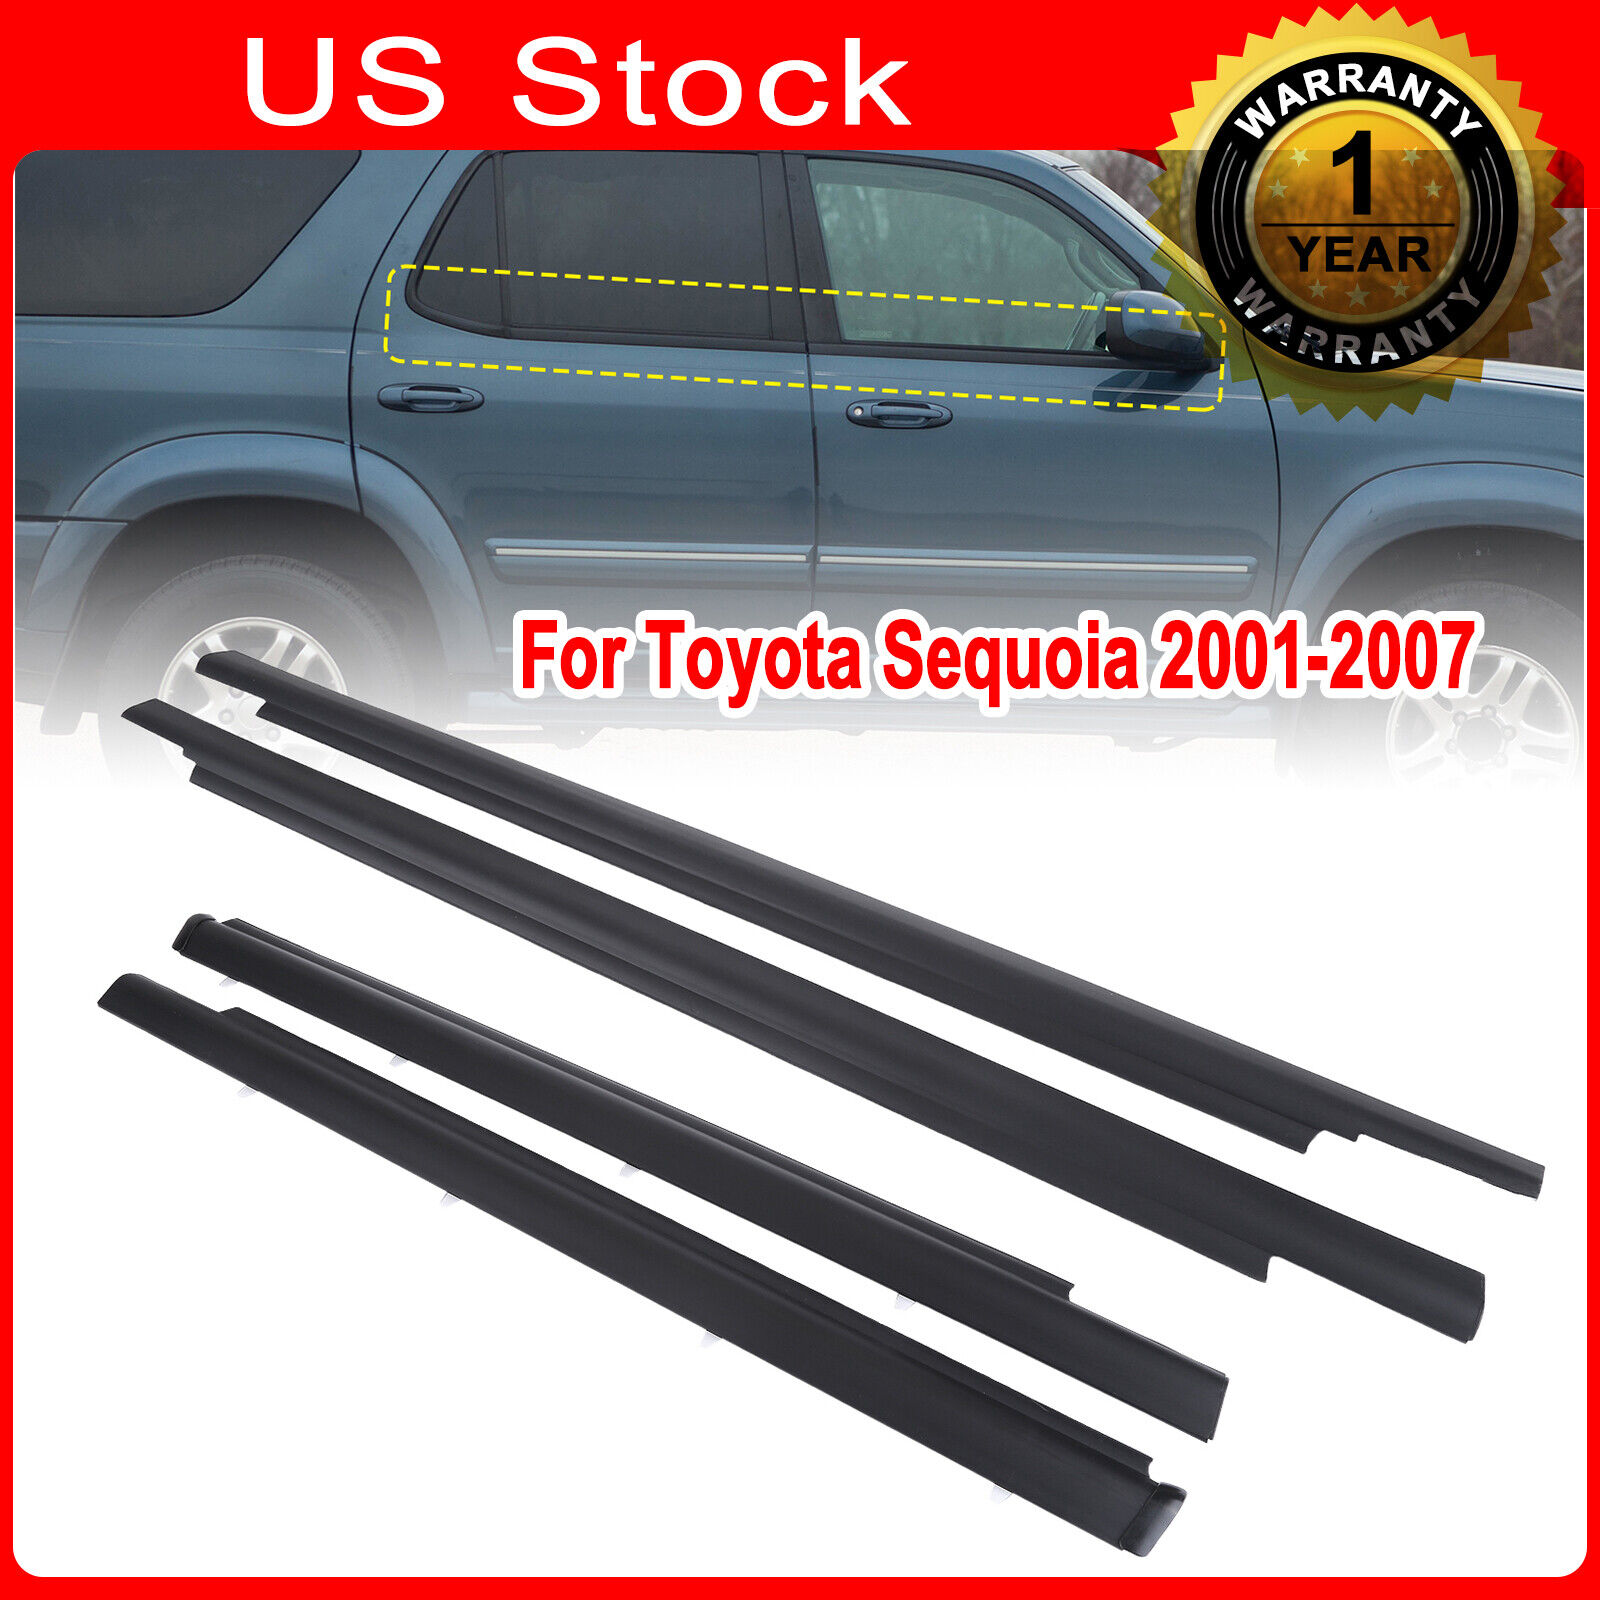 4x New Weatherstrip Window Seal Moulding Trim Seal Belt For Toyota SEQUOIA 01-07